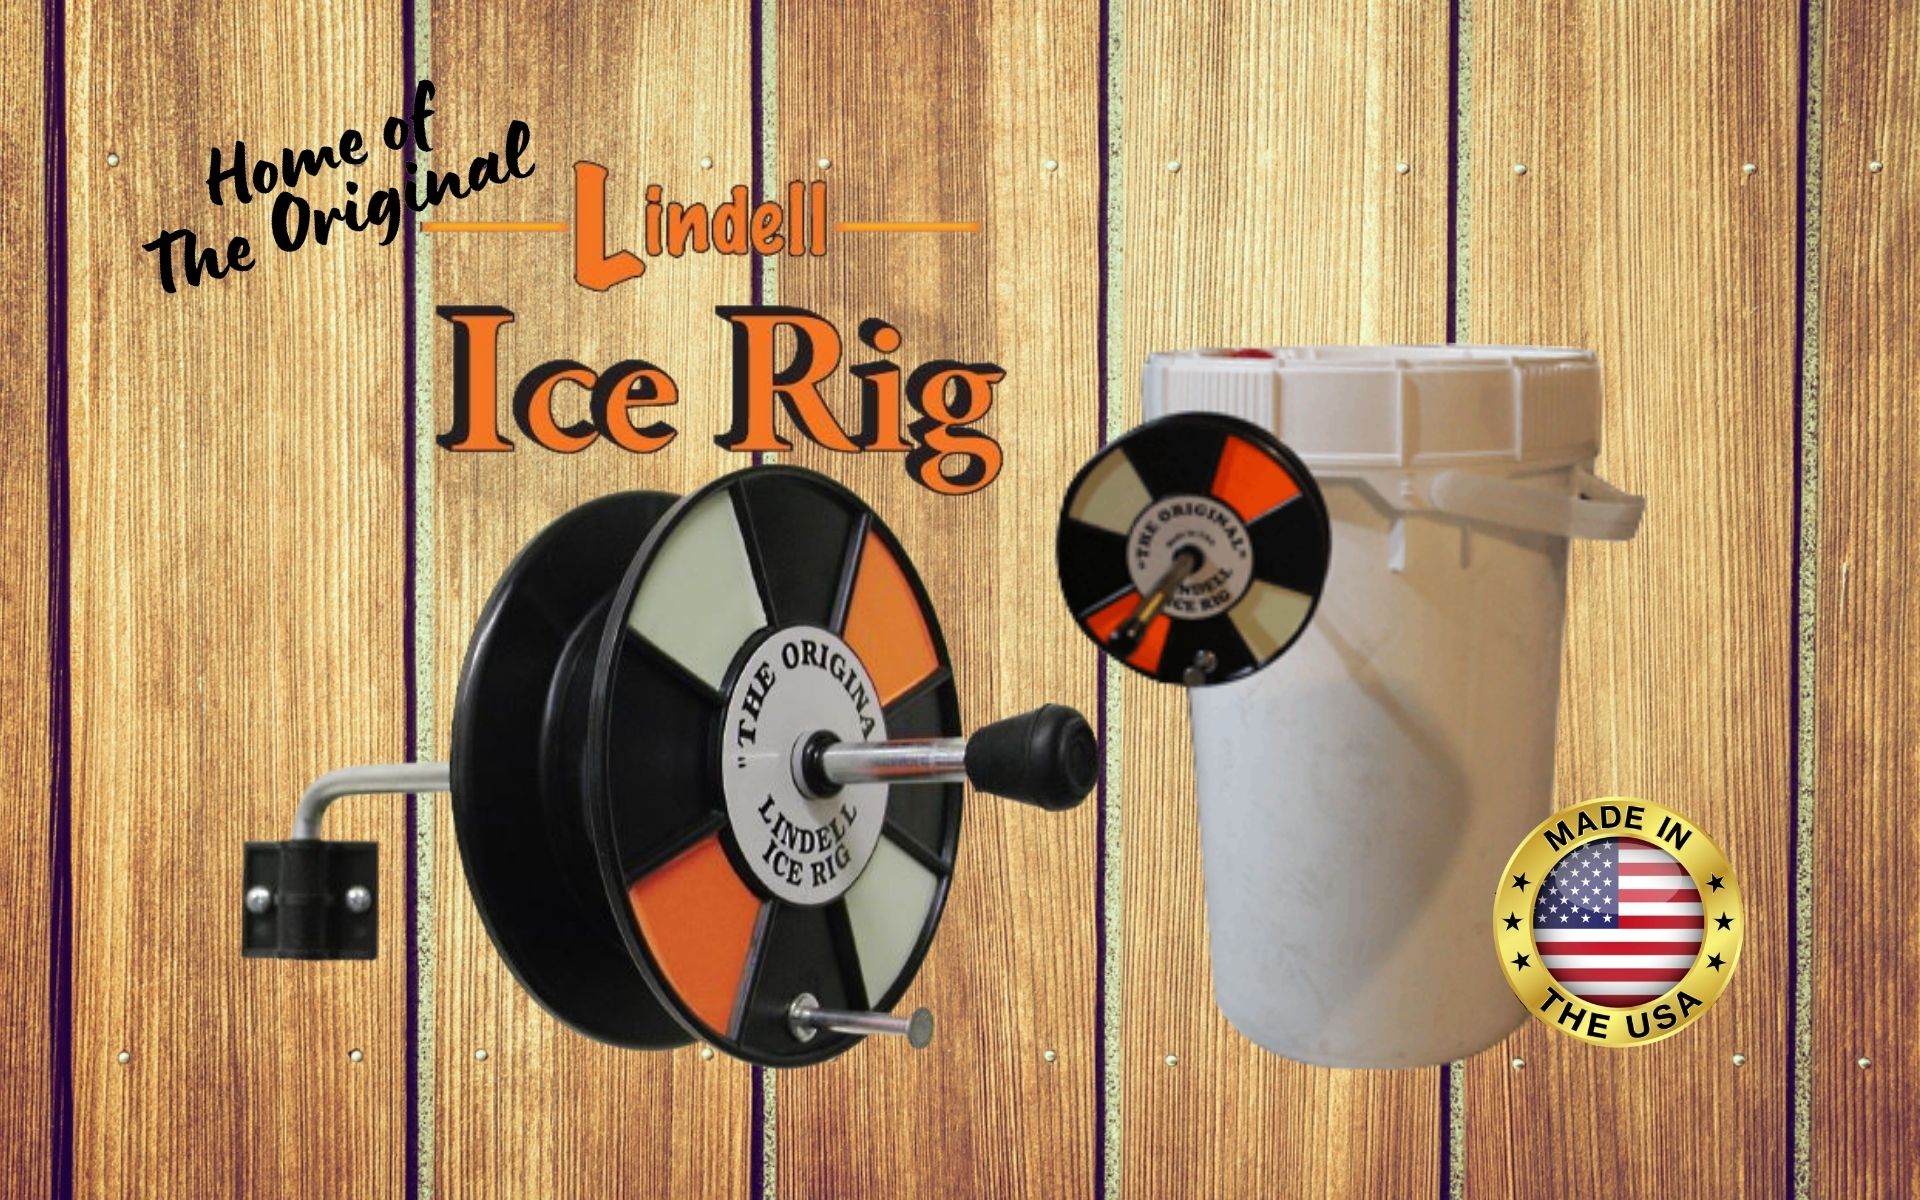 Buy Auto Jigger and 3 Lindell Ice Rigs, Get the 4th Ice Rig Free